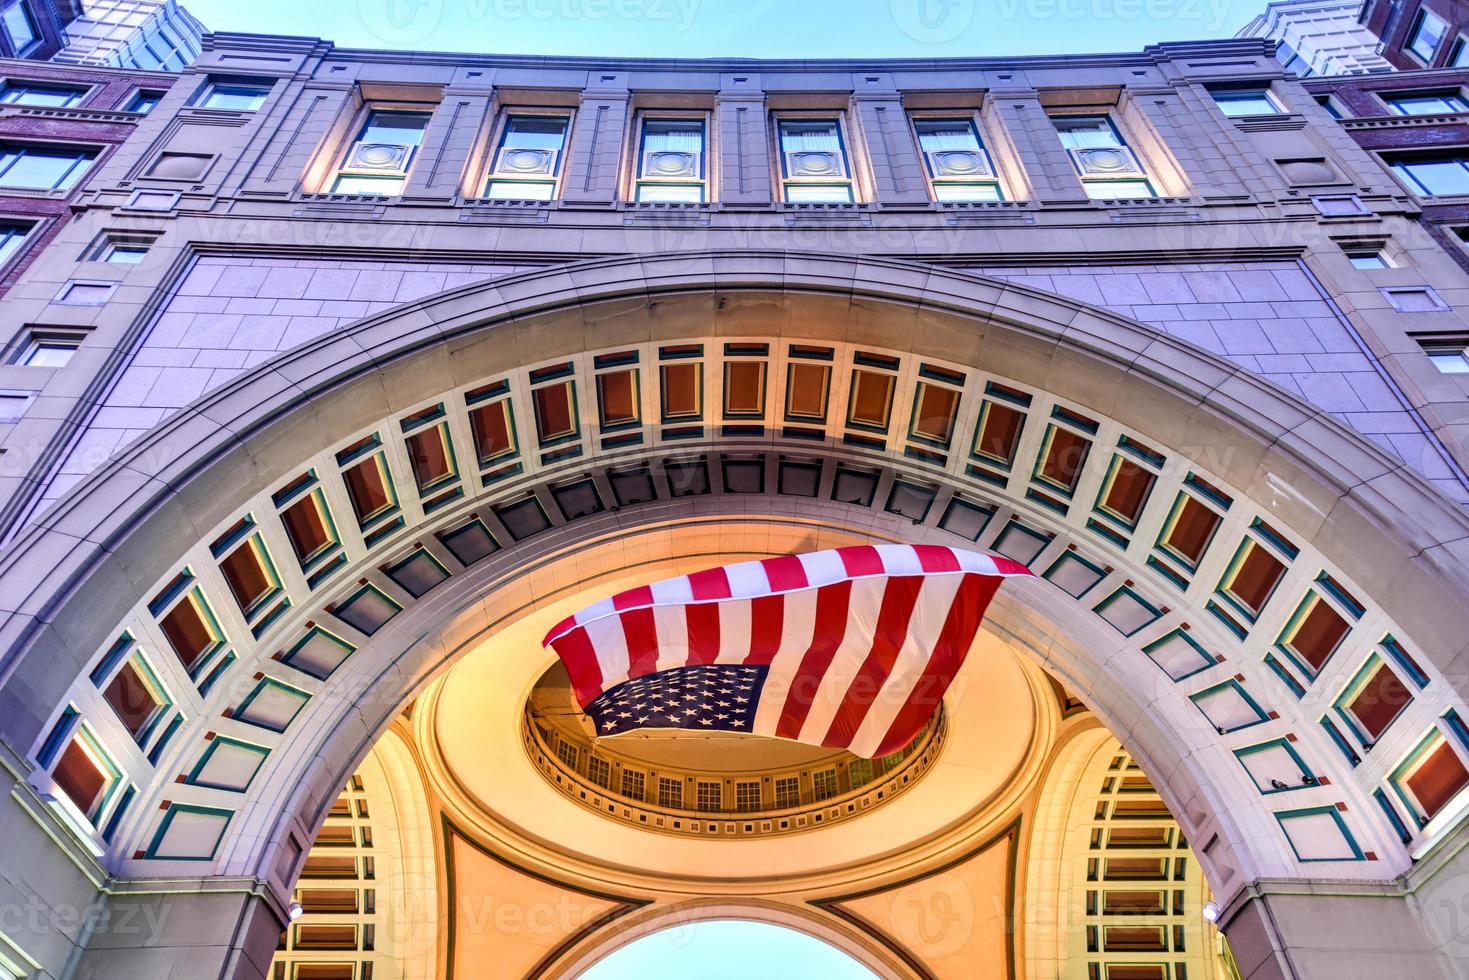 The arch at Rowes Wharf in Boston, Massachusetts. photo